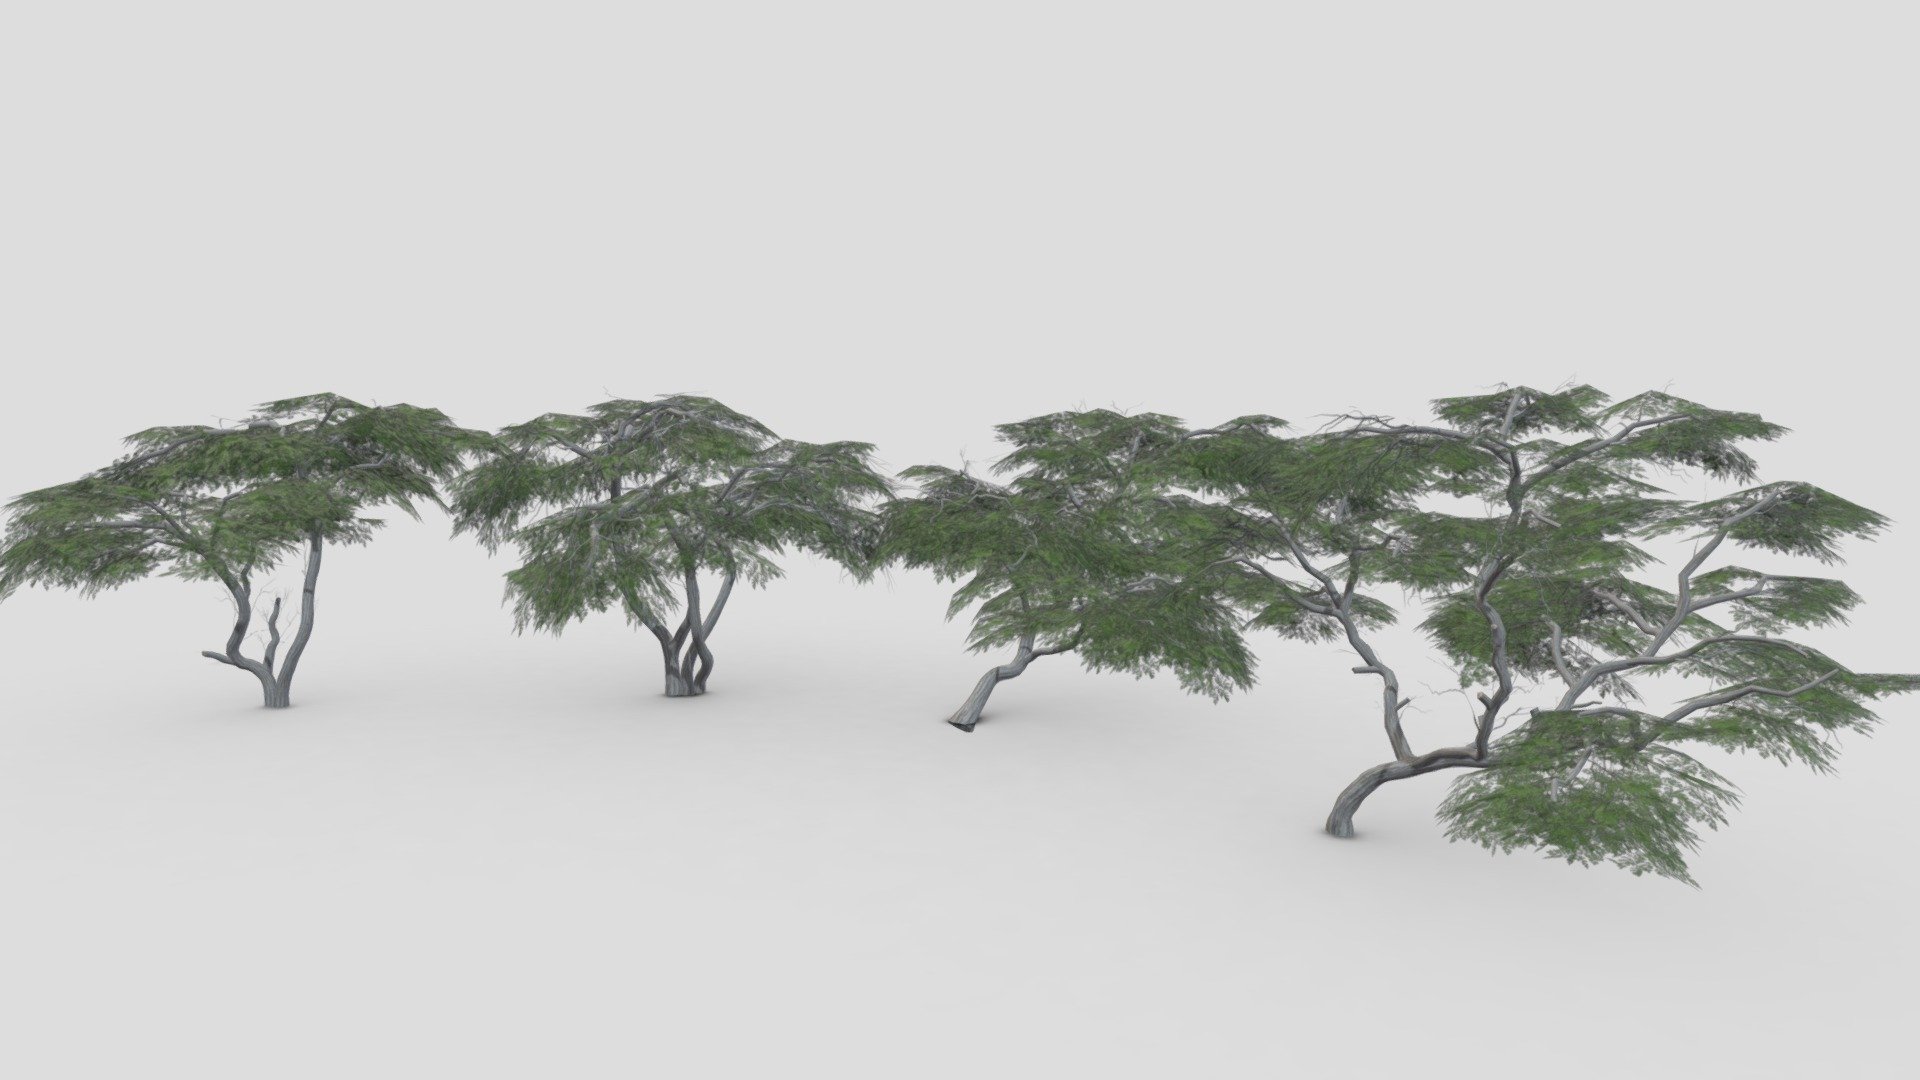 I tried to work on Acacia Tree 3D model. This is a 3D low poly pack of Acacia Tree. This 3D low poly collection contains 4 3D models of Acacia Tree 3d model